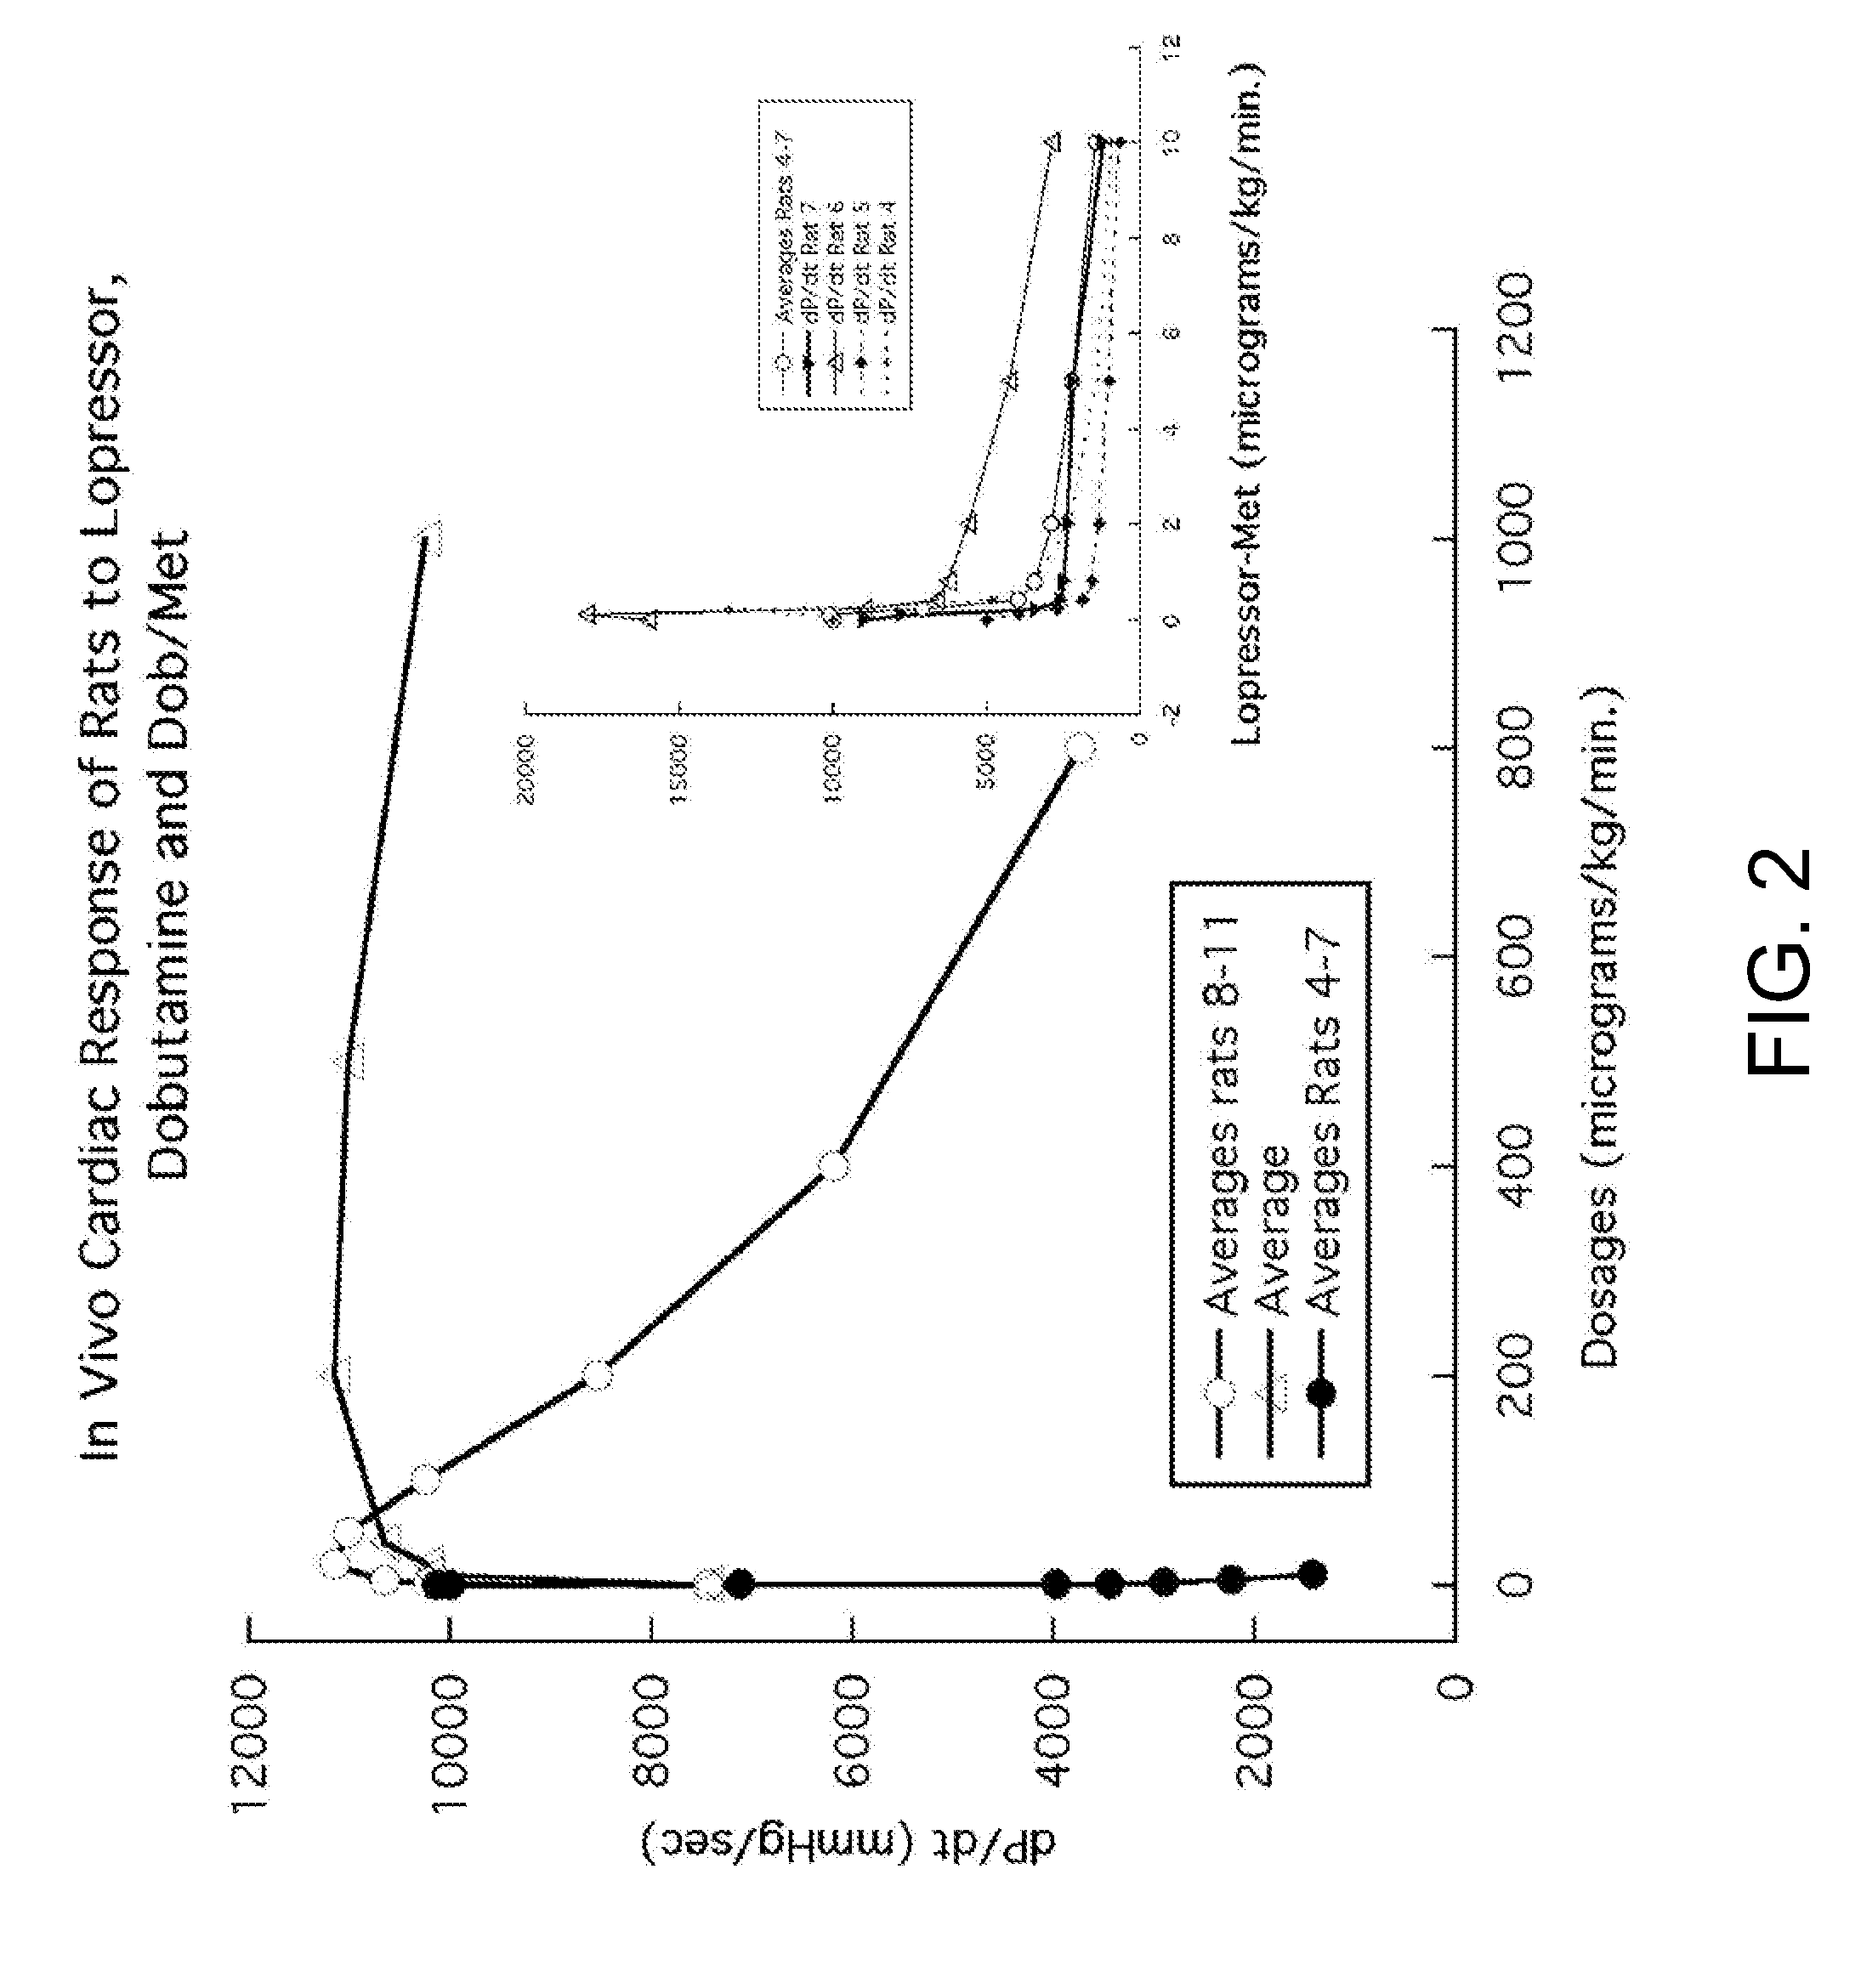 Method For Determining Drug-Molecular Combinations That Modulate And Enhance The Therapeutic Safety And Efficacy Of Biological Or Pharmaceutical Drugs